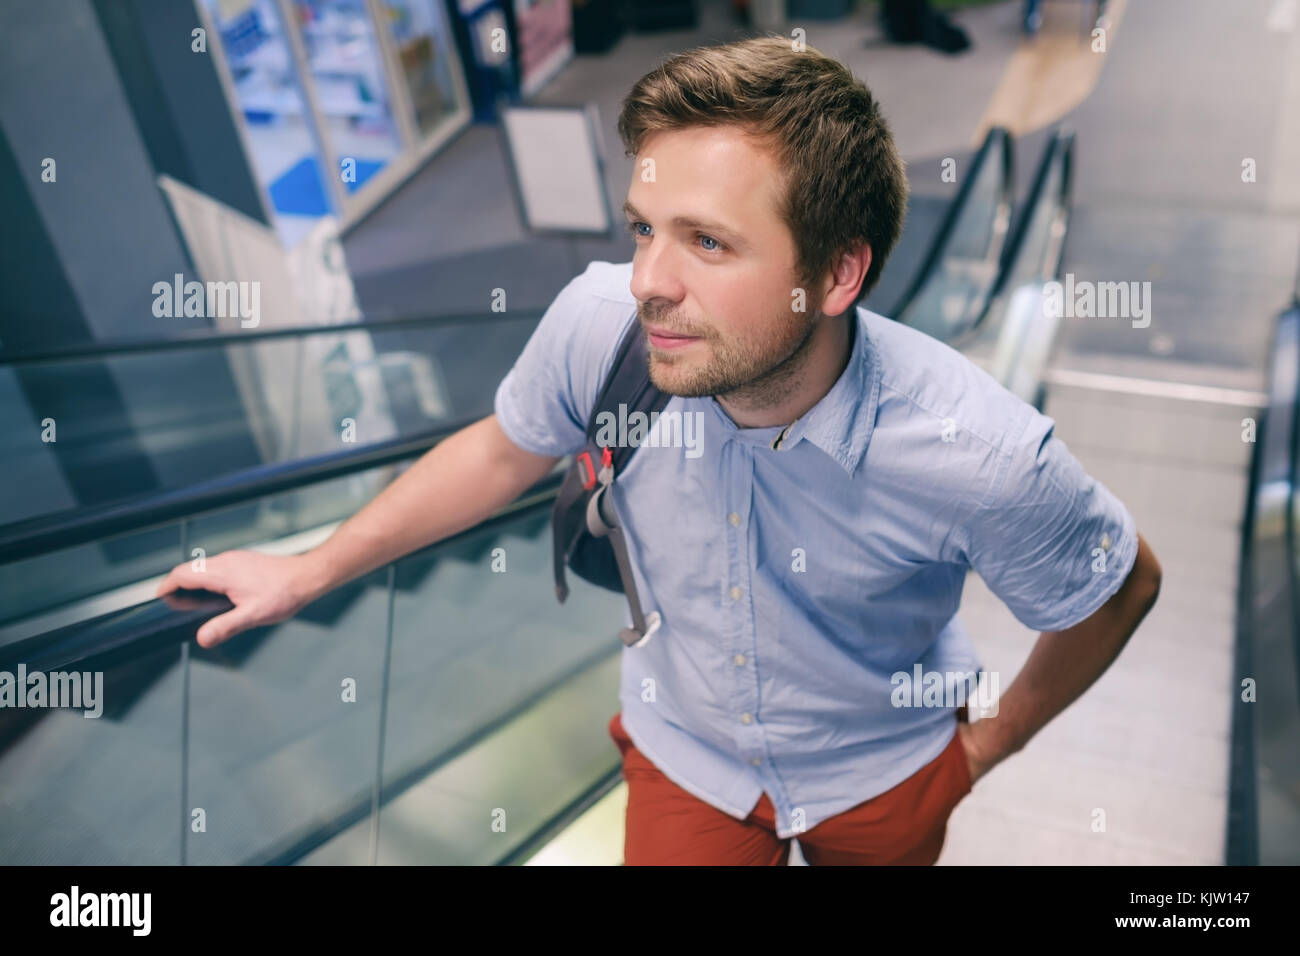 Young caucasian man moving up on an escalator at the airport. Stock Photo